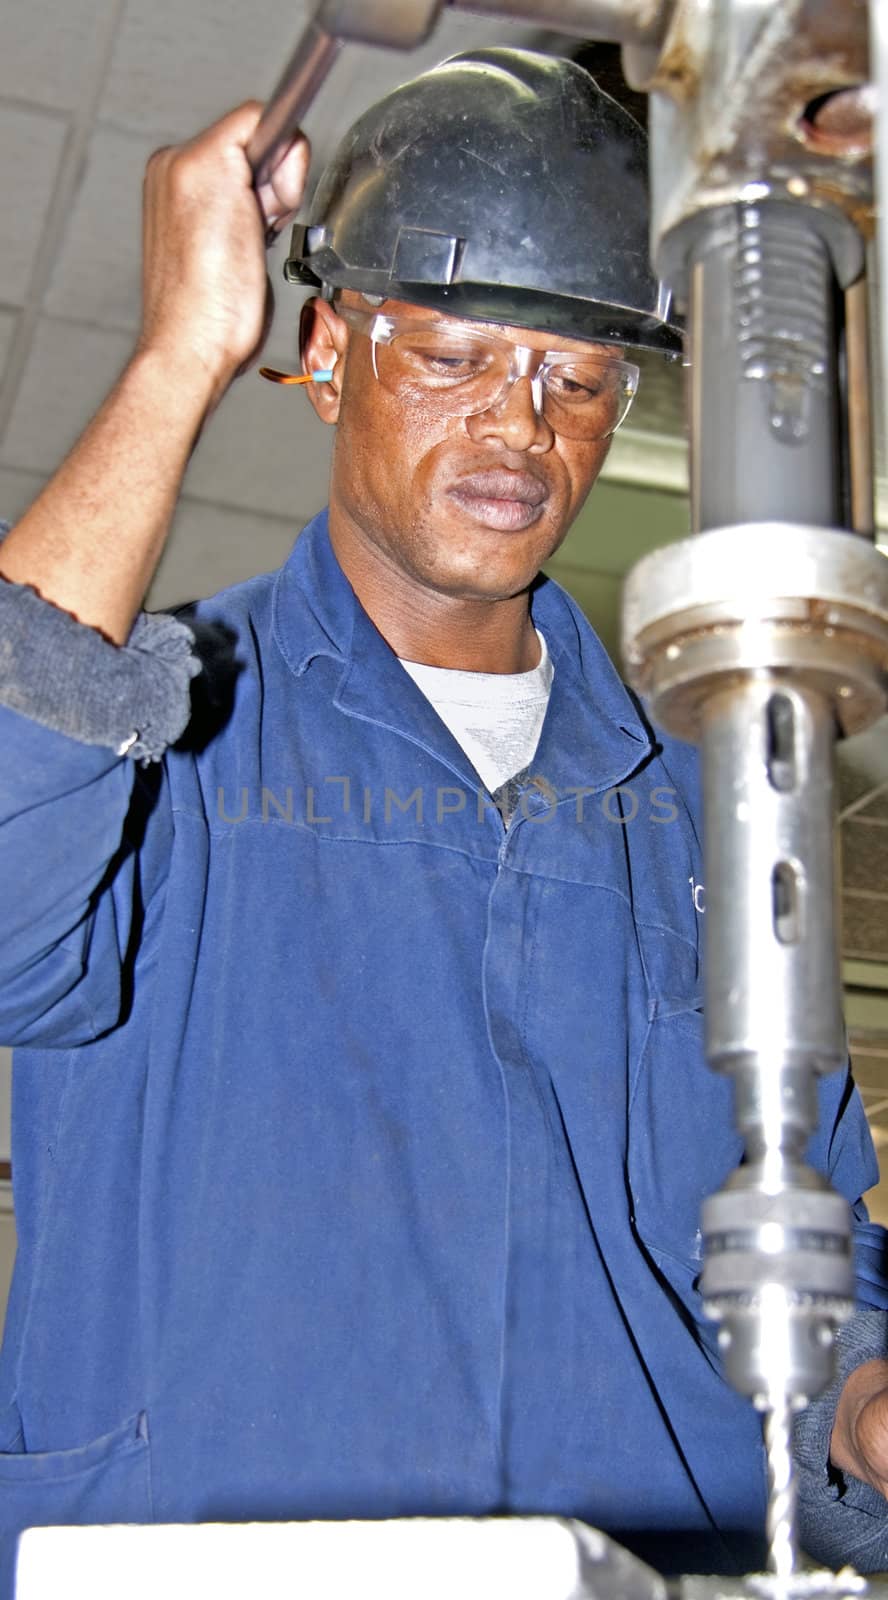 Man drilling with an industrial drill press